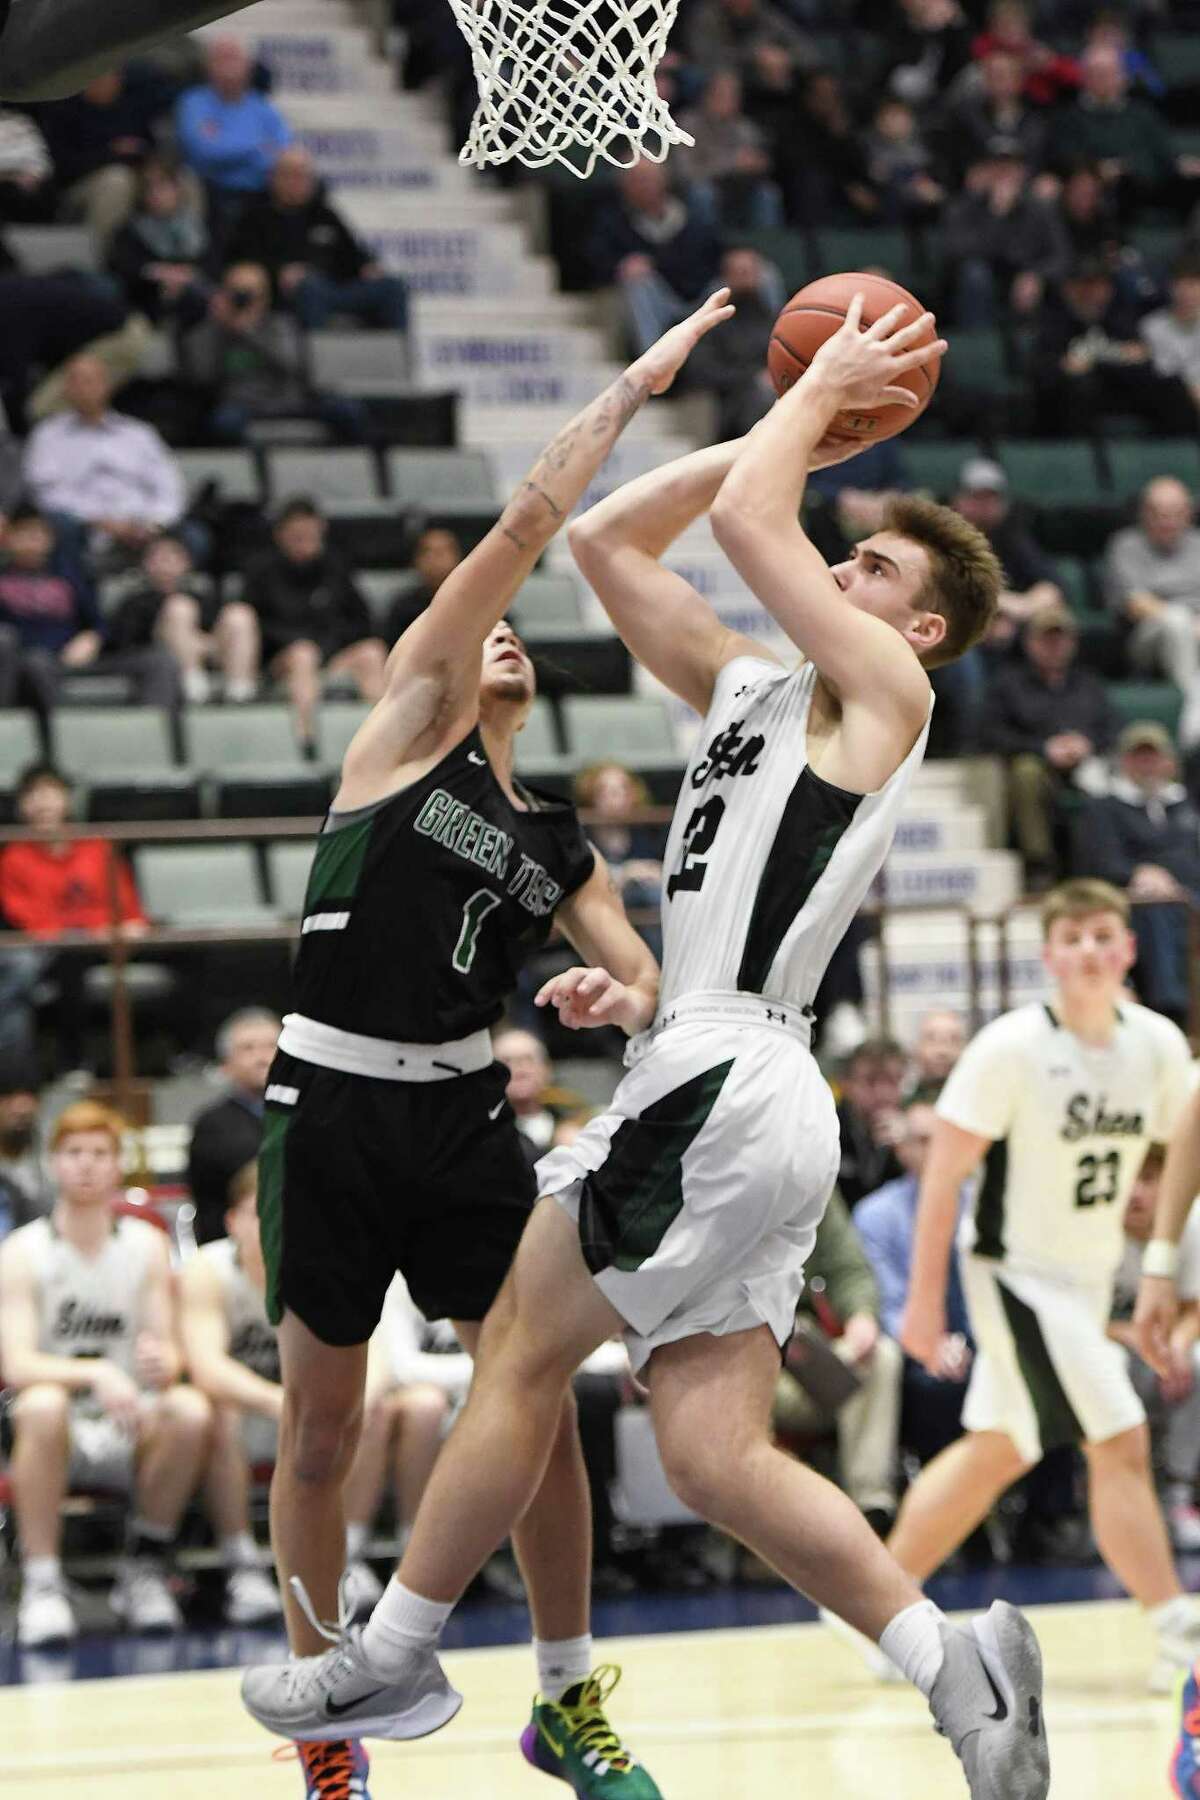 Green Tech's Joshua Rodriguez attempts to block a shot by Shenendehowa's Jake Reinisch during the Class AA Sectional Final at Cool Insuring Arena in Glens Falls, N.Y., on Saturday, Mar. 7, 2020. (Jenn March, Special to the Times Union)